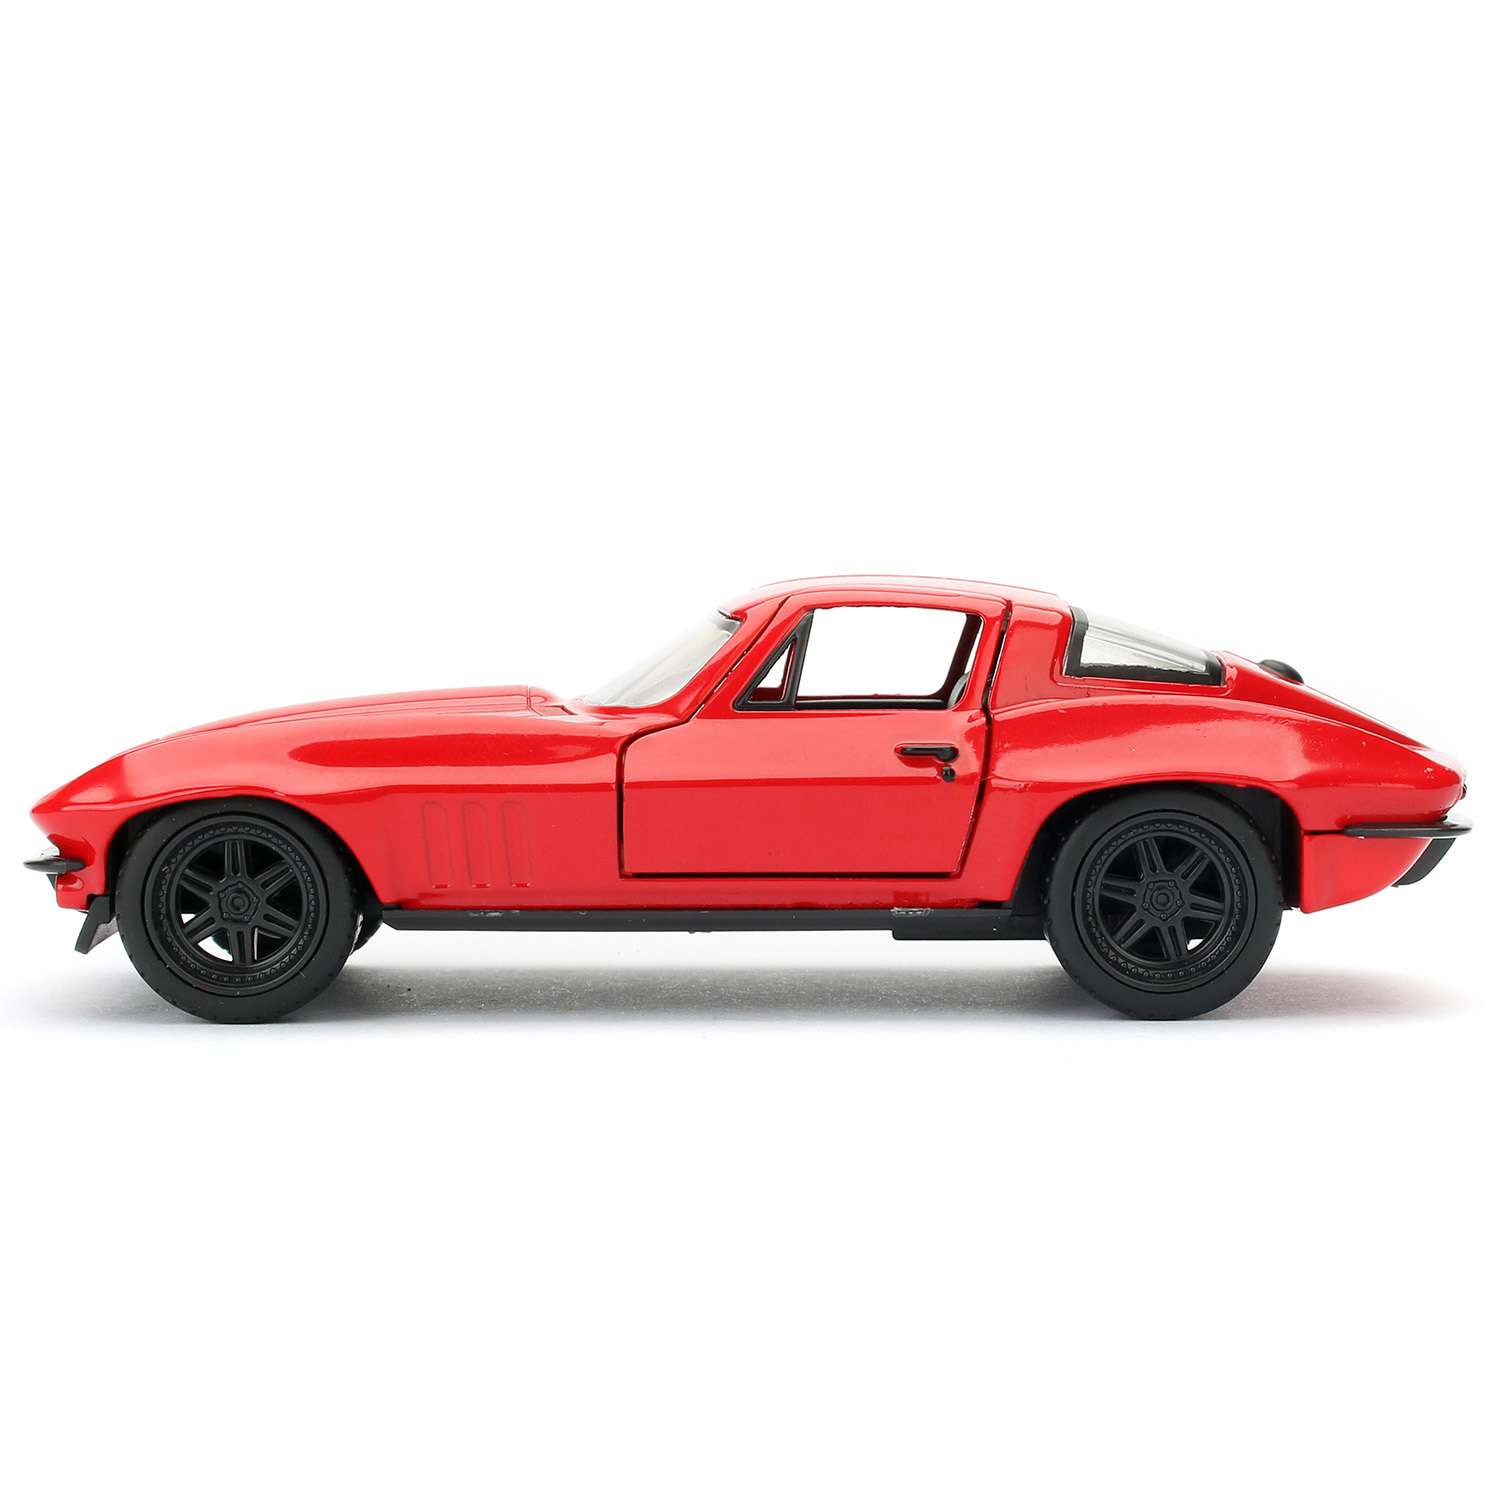 Машинка Fast and Furious Die-cast Chevy Corvette 1:32 металл 24037 - фото 2